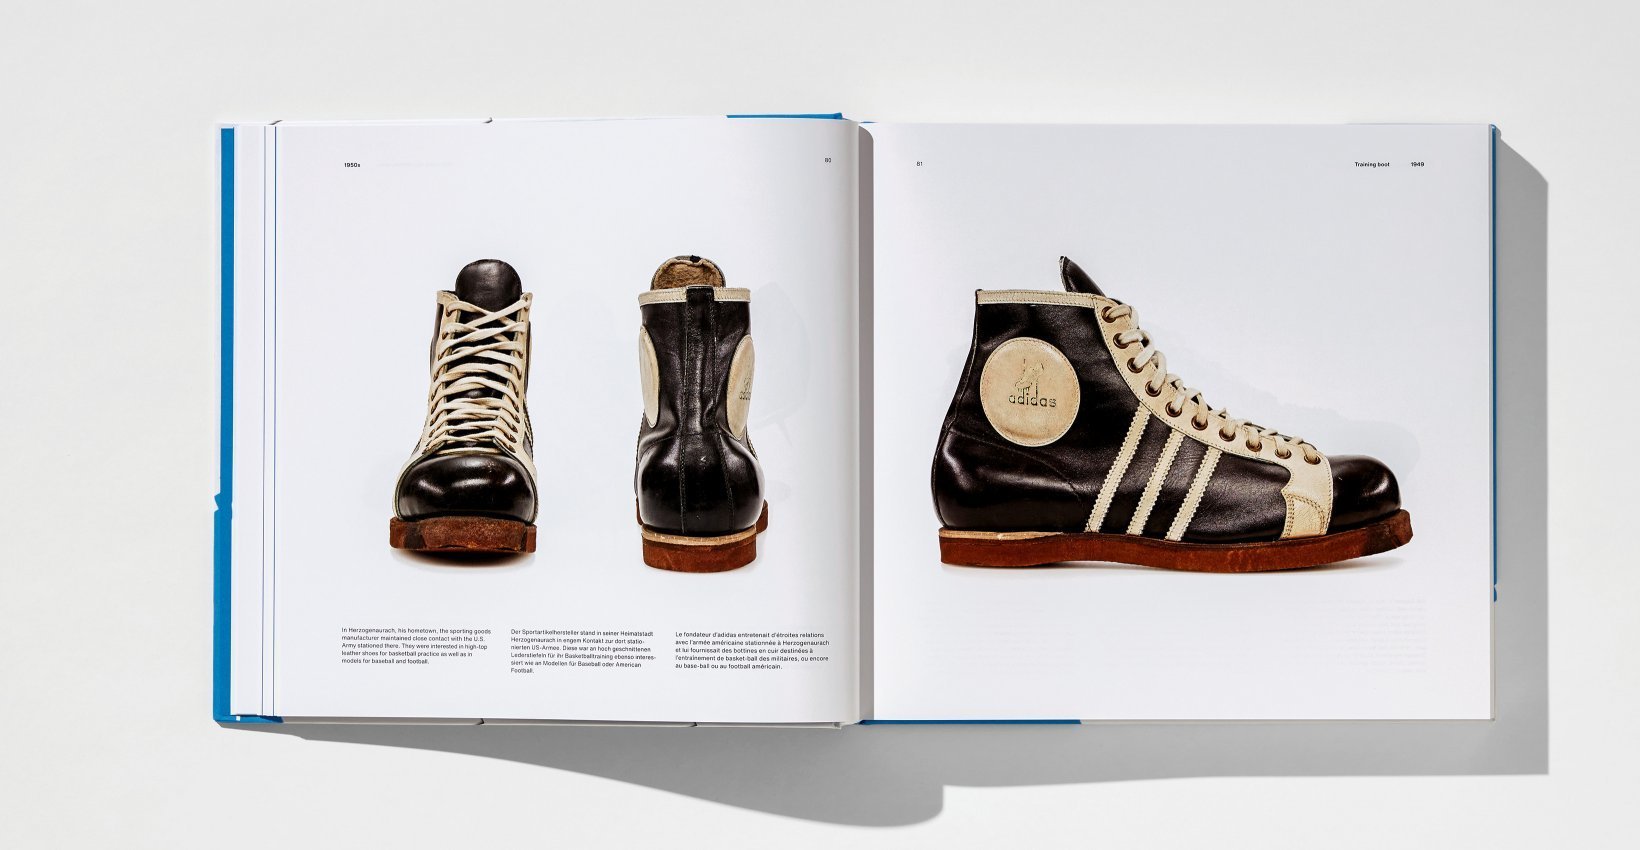 Adidas Archive: The Footwear Collection